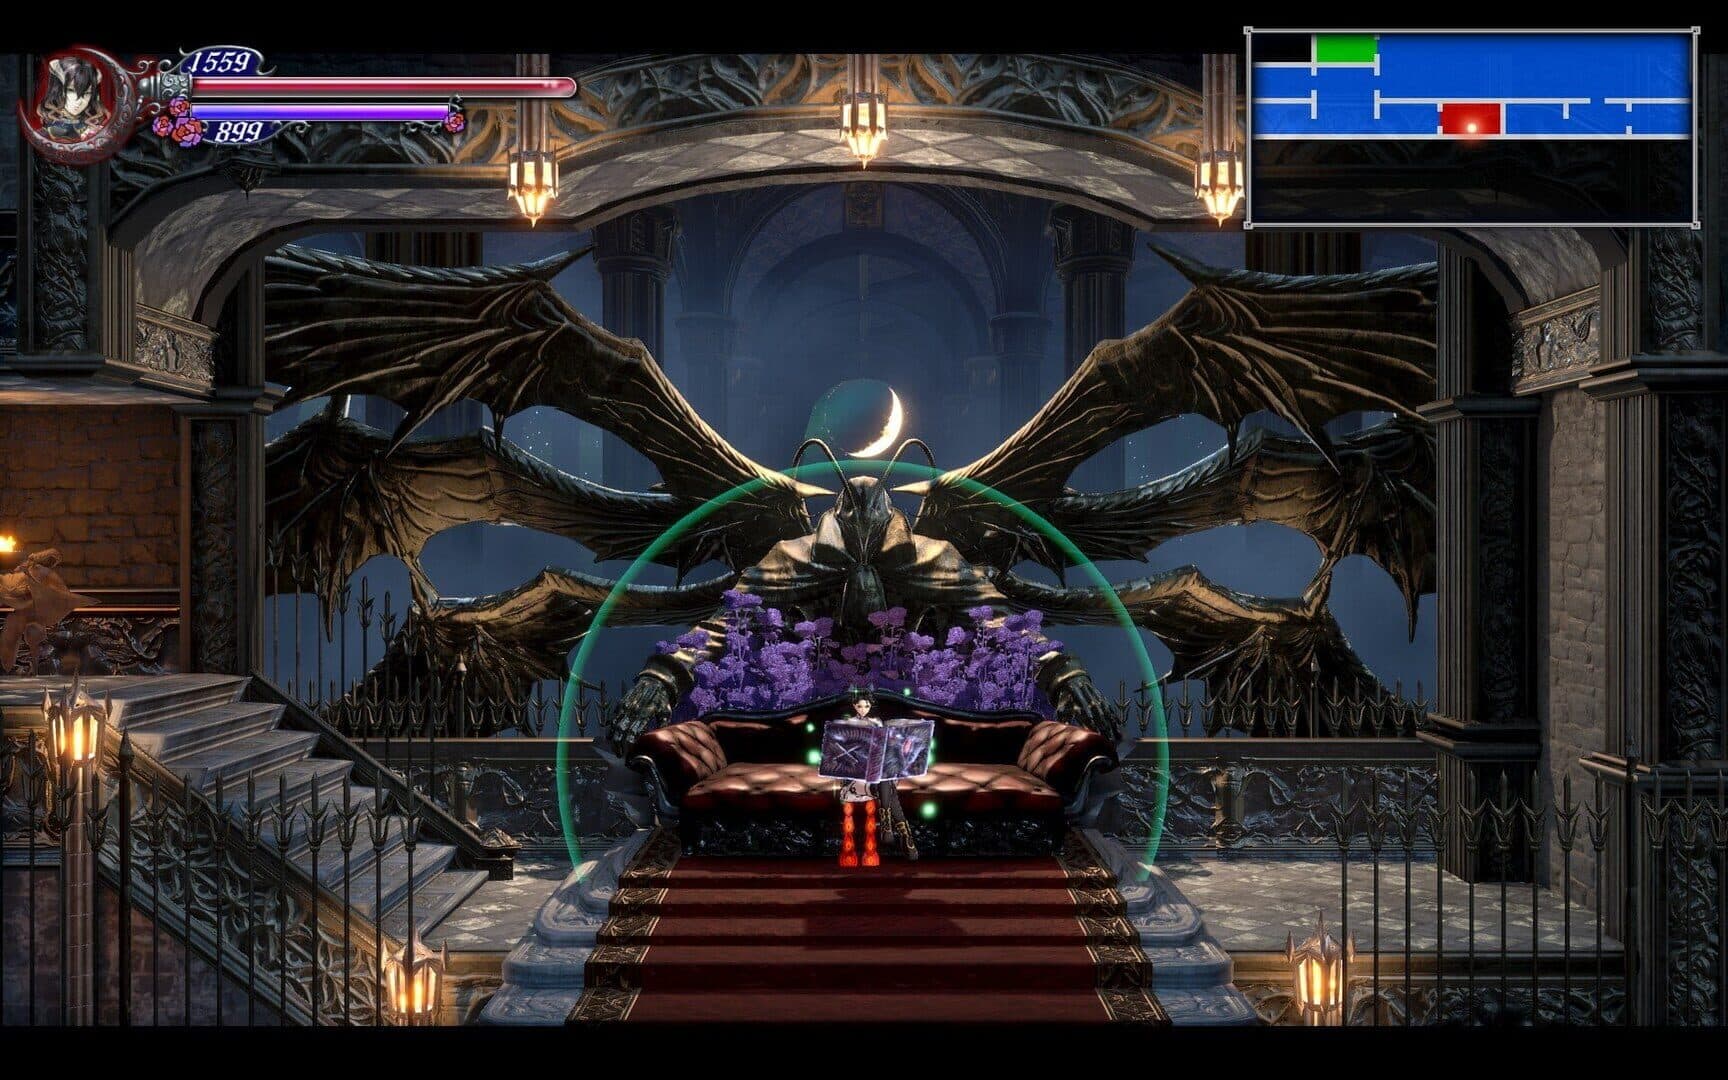 Bloodstained: Ritual of the Night Image